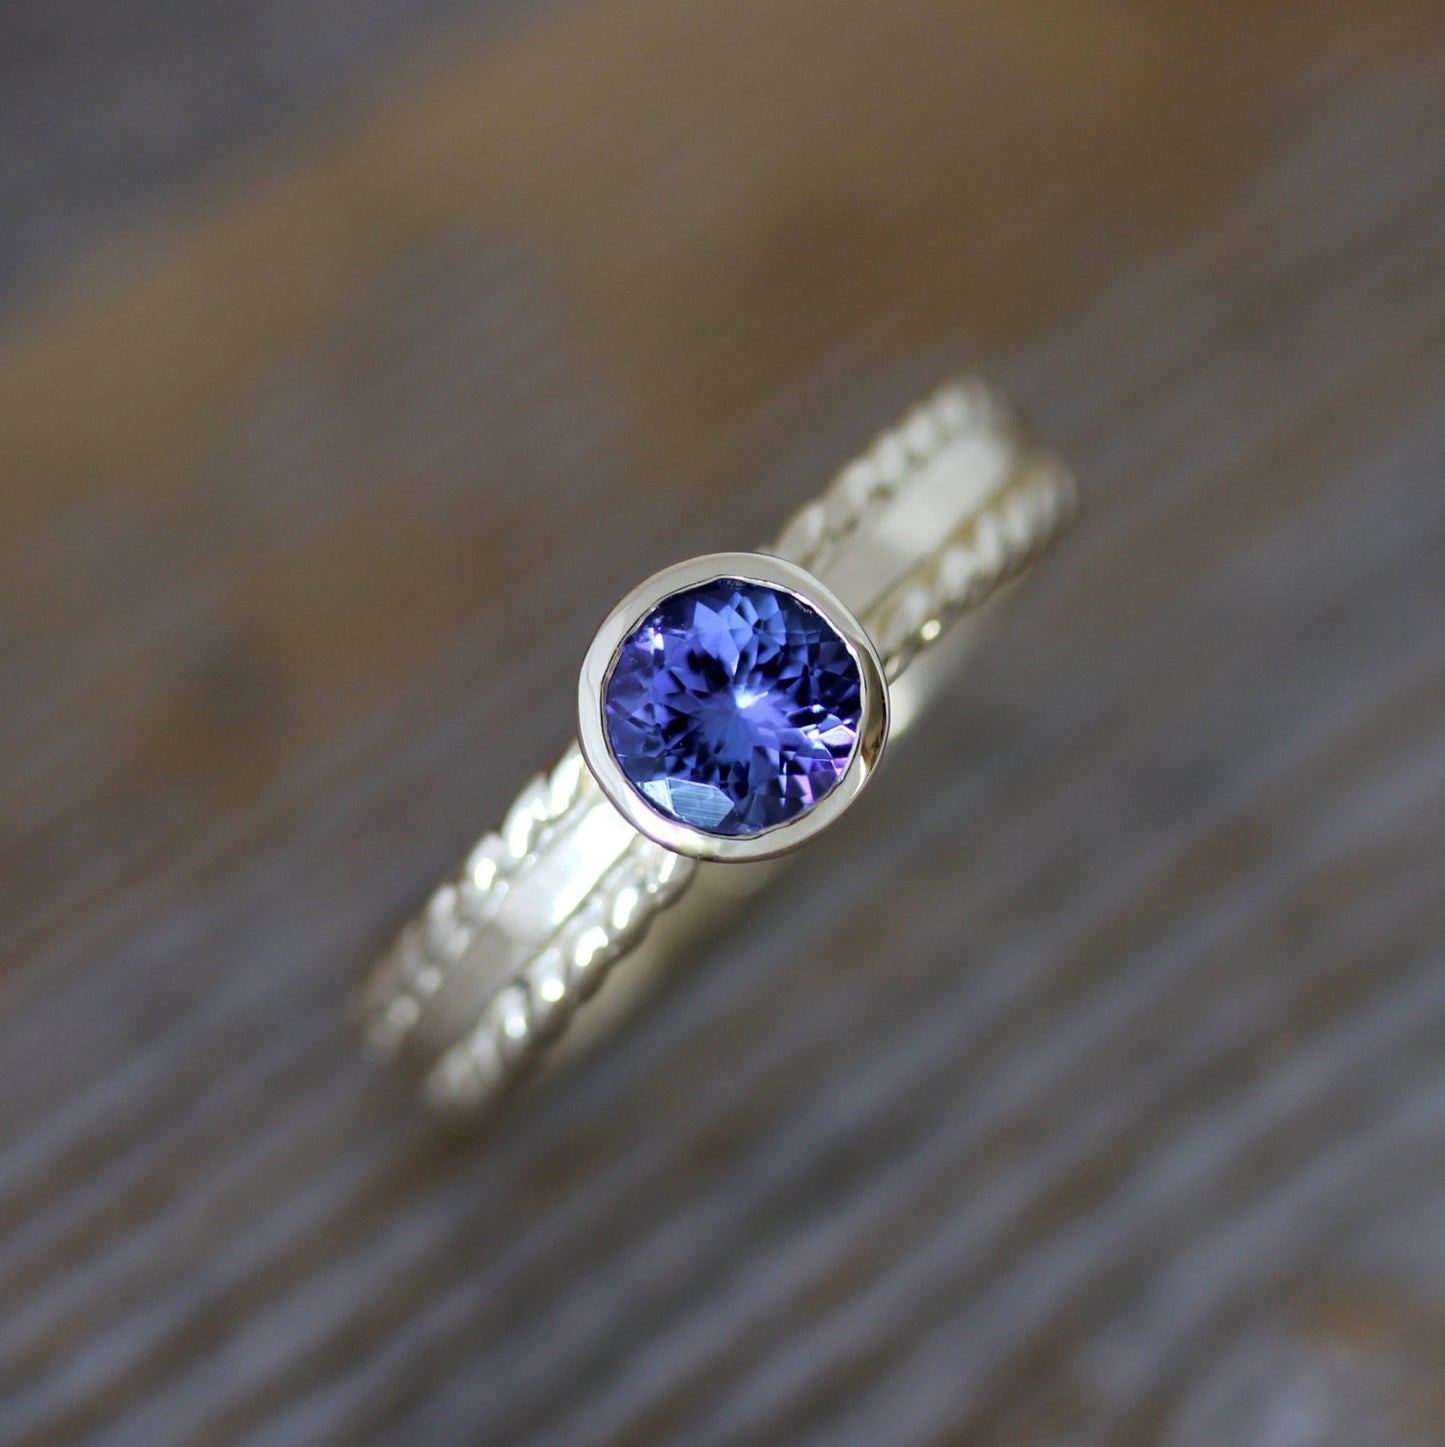 A handmade engagement ring with a Royal Blue Tanzanite and 14k Yellow Gold Gemstone, designed by Cassin Jewelry.